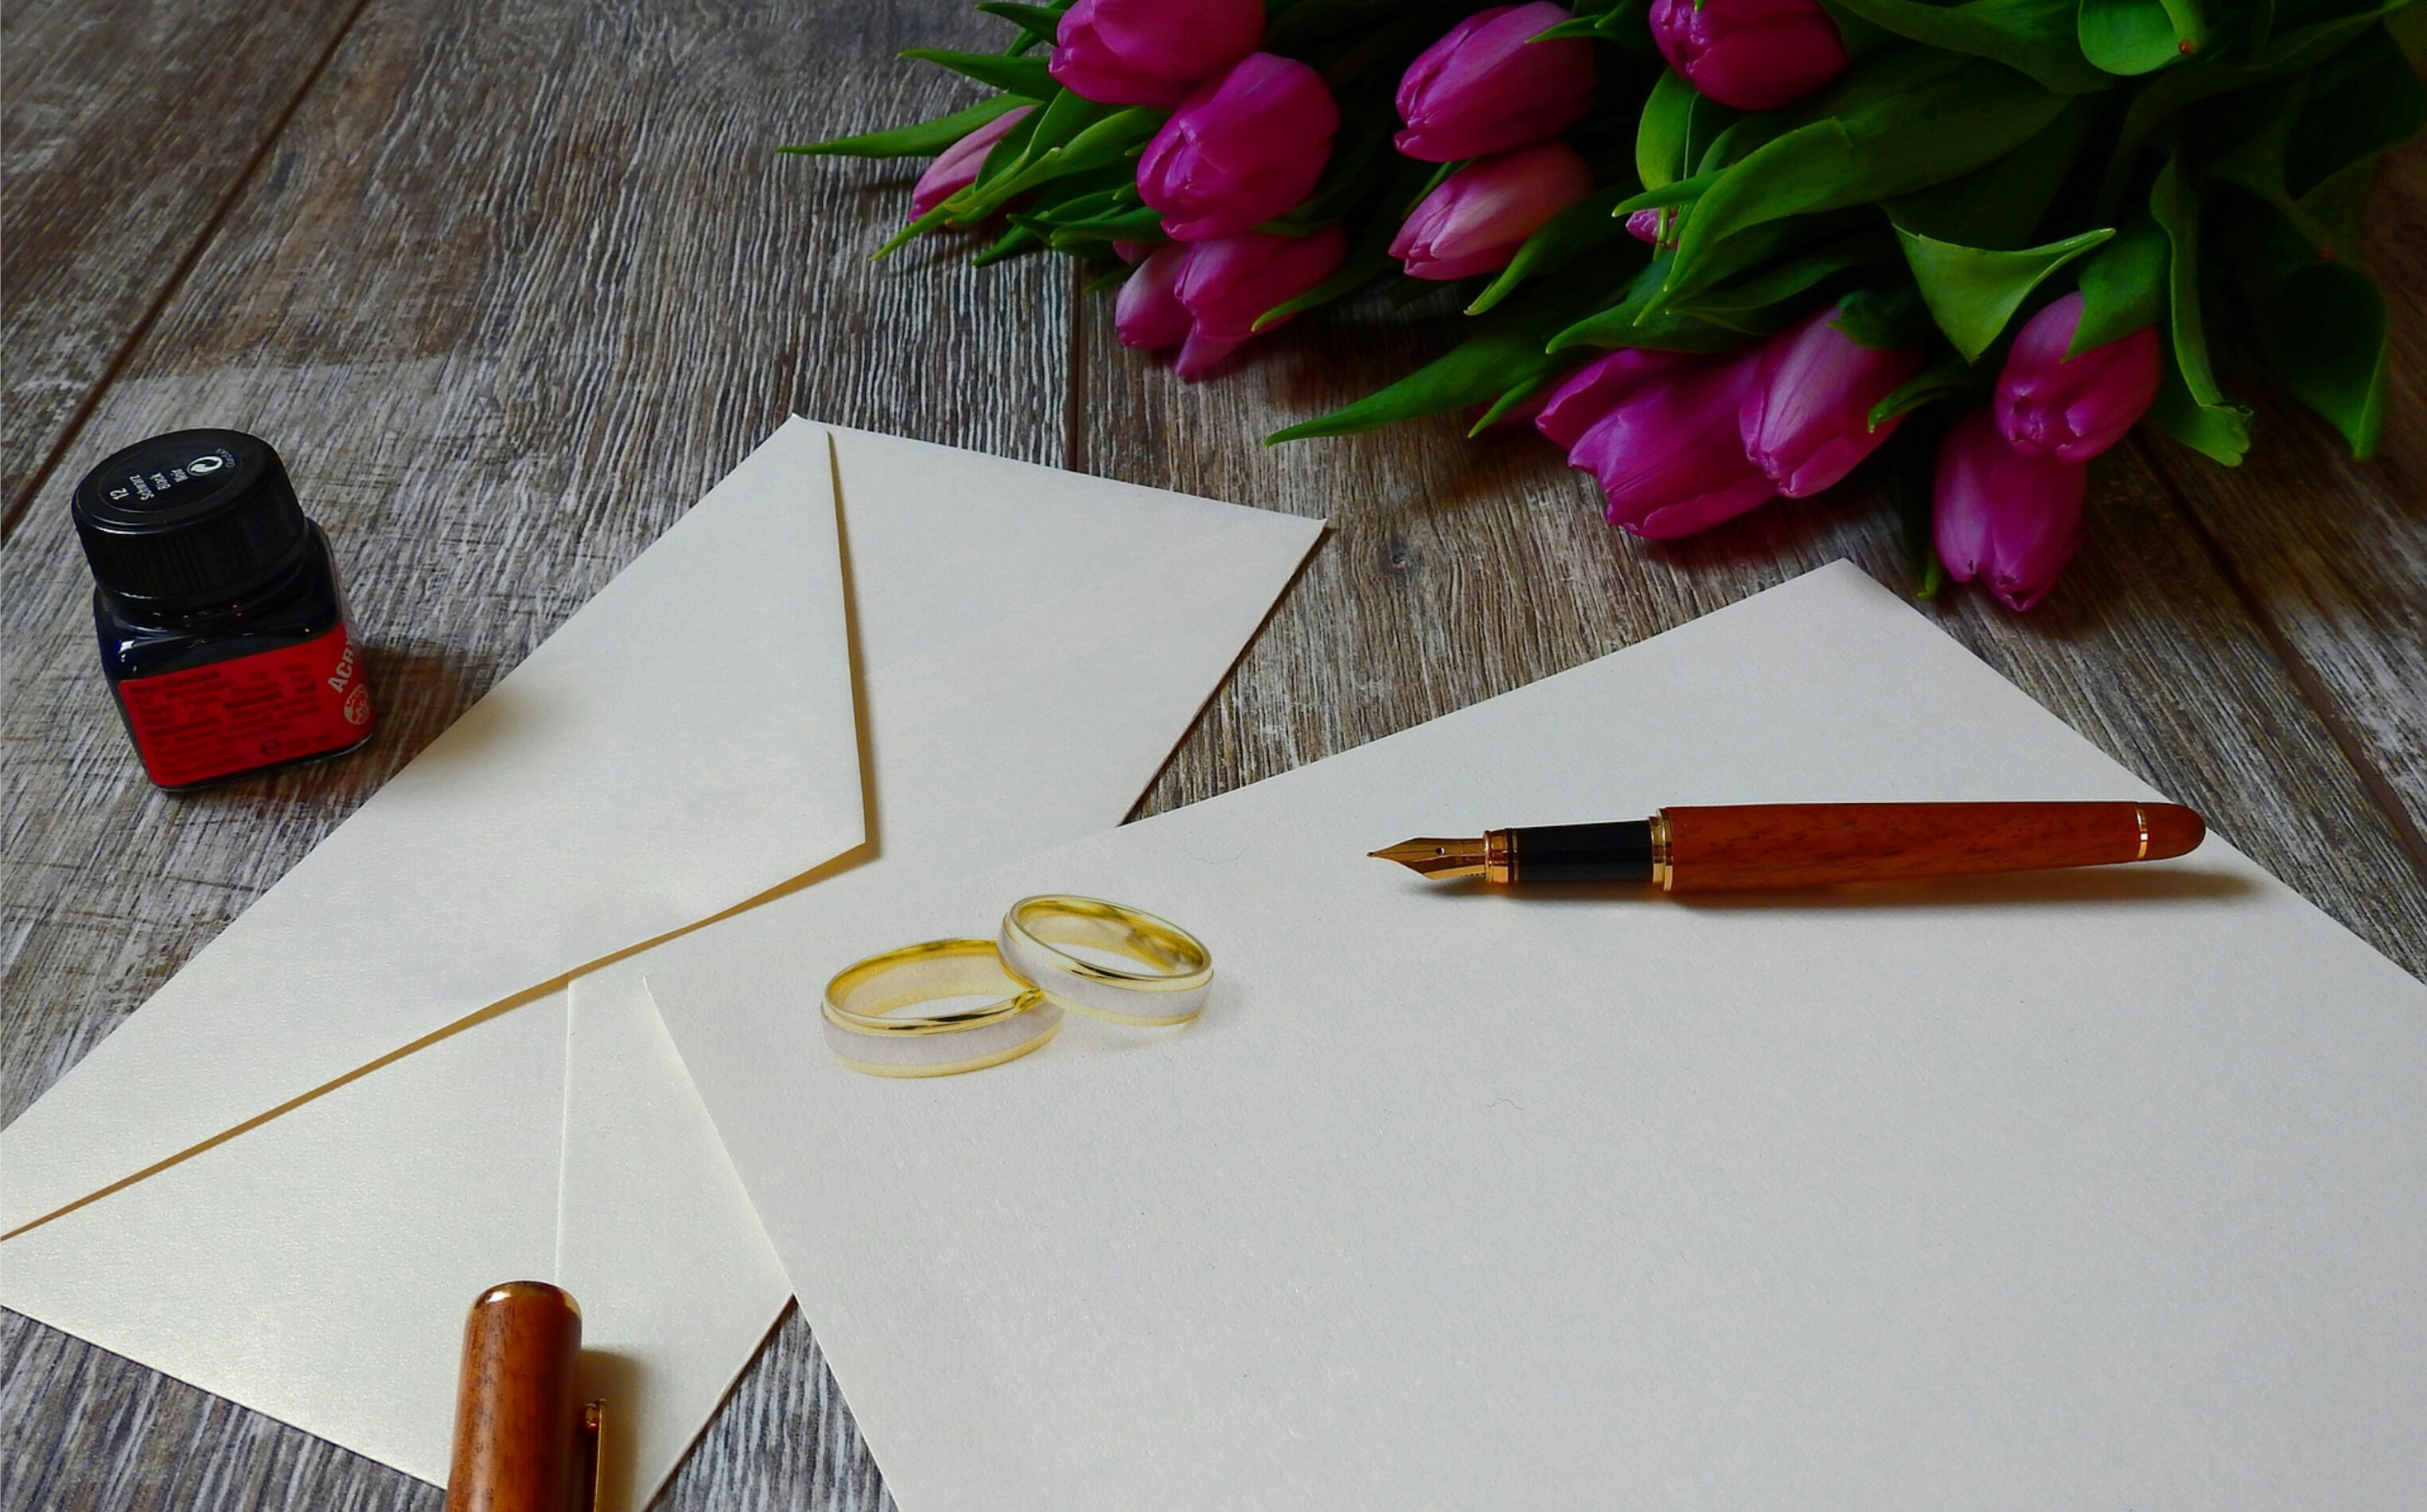 wedding invitations on a wooden table with a fountain pen, jar of ink, and wedding bands on top of them